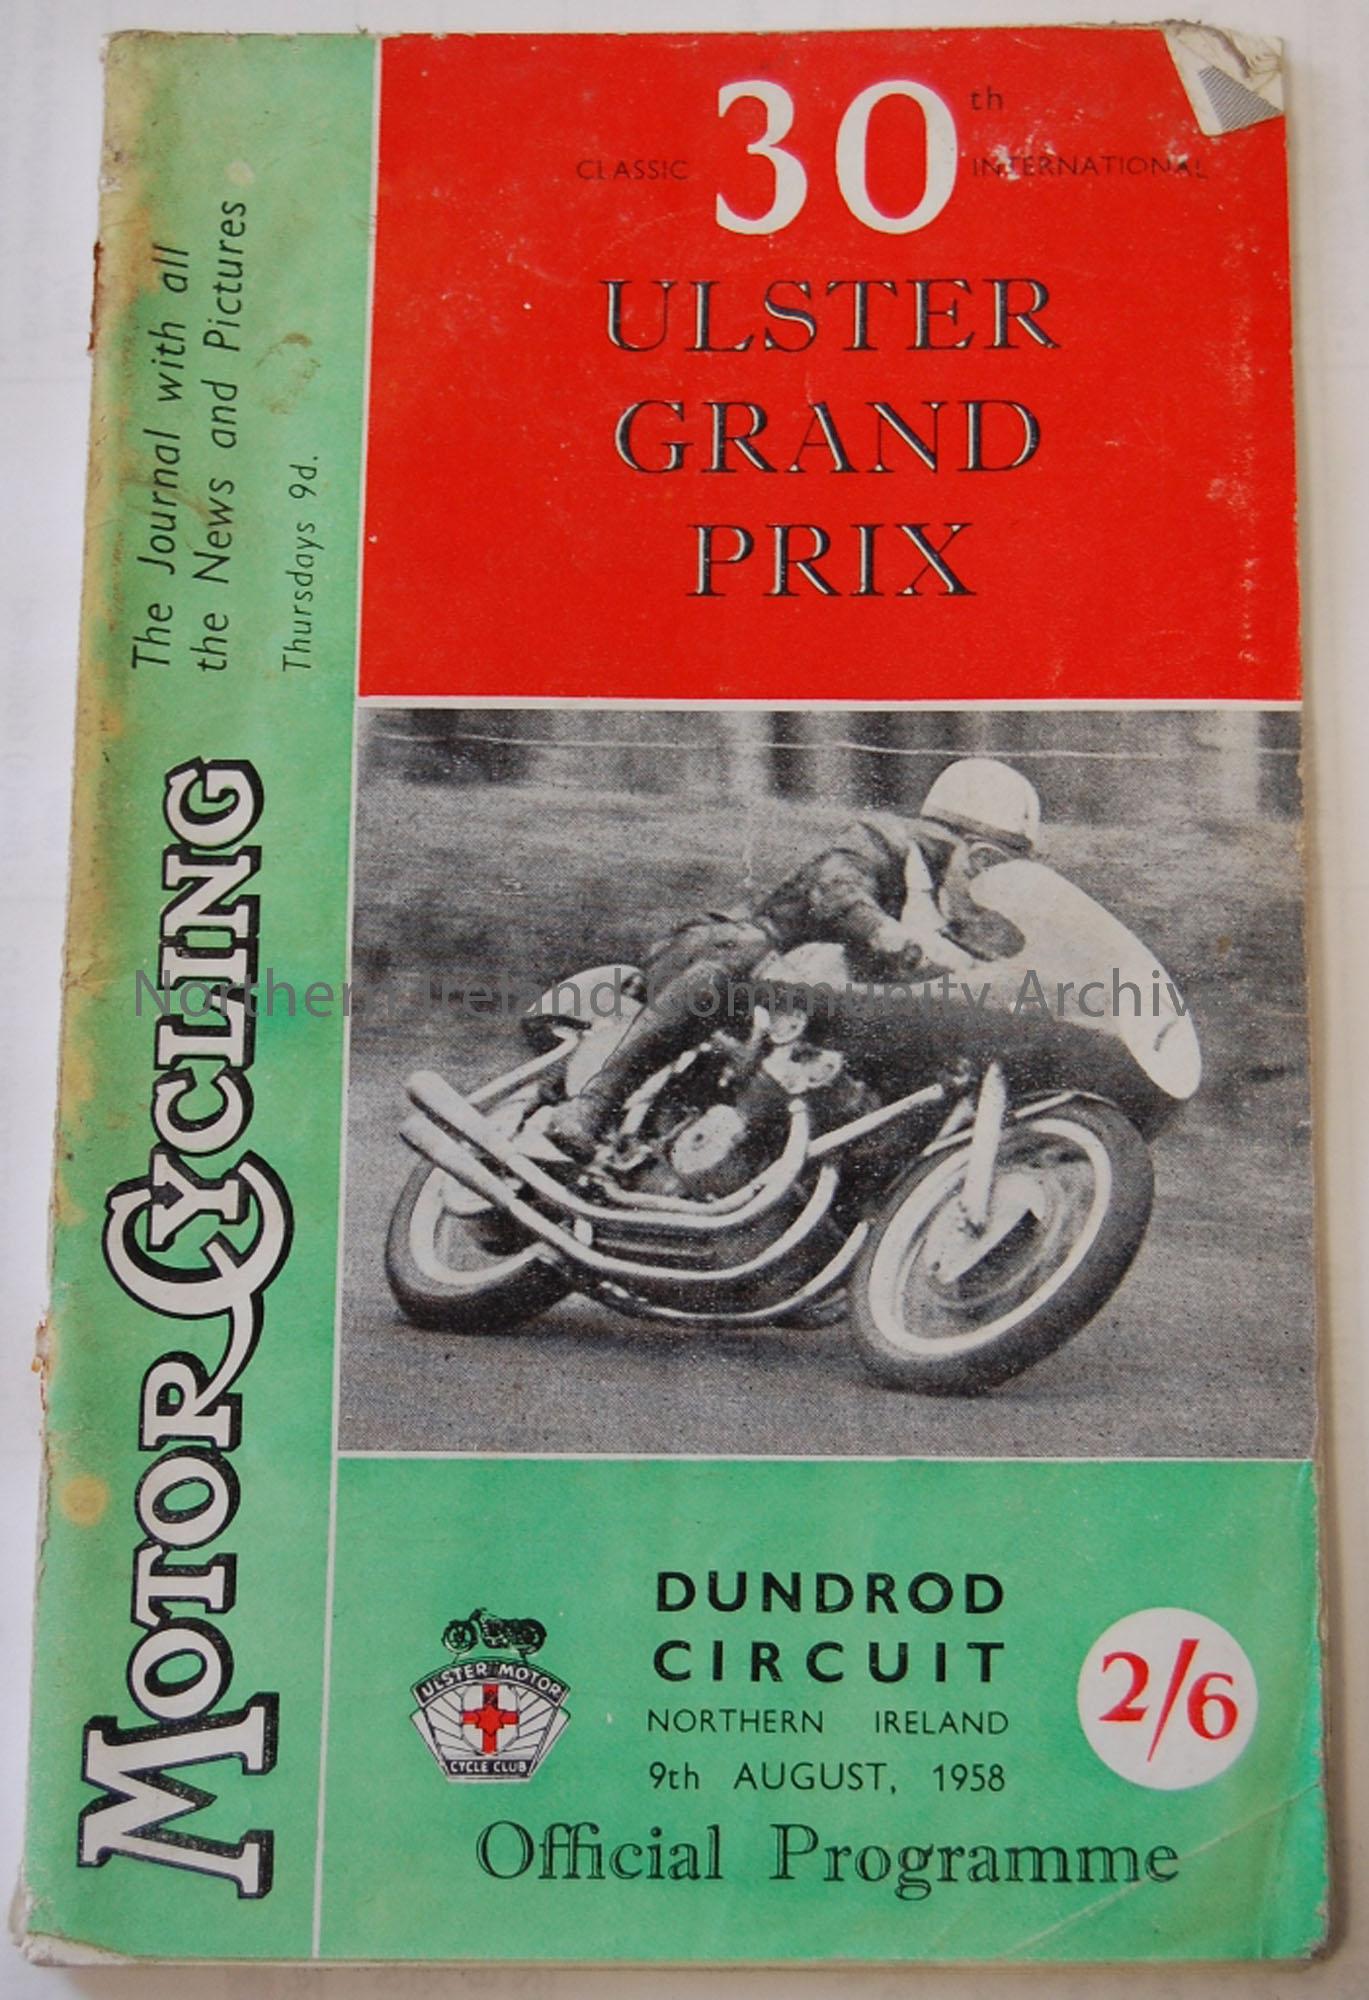 Official Souvenir programme- 22nd Classic International Ulster Grand Prix 19th August, 1950 Price 2/-.